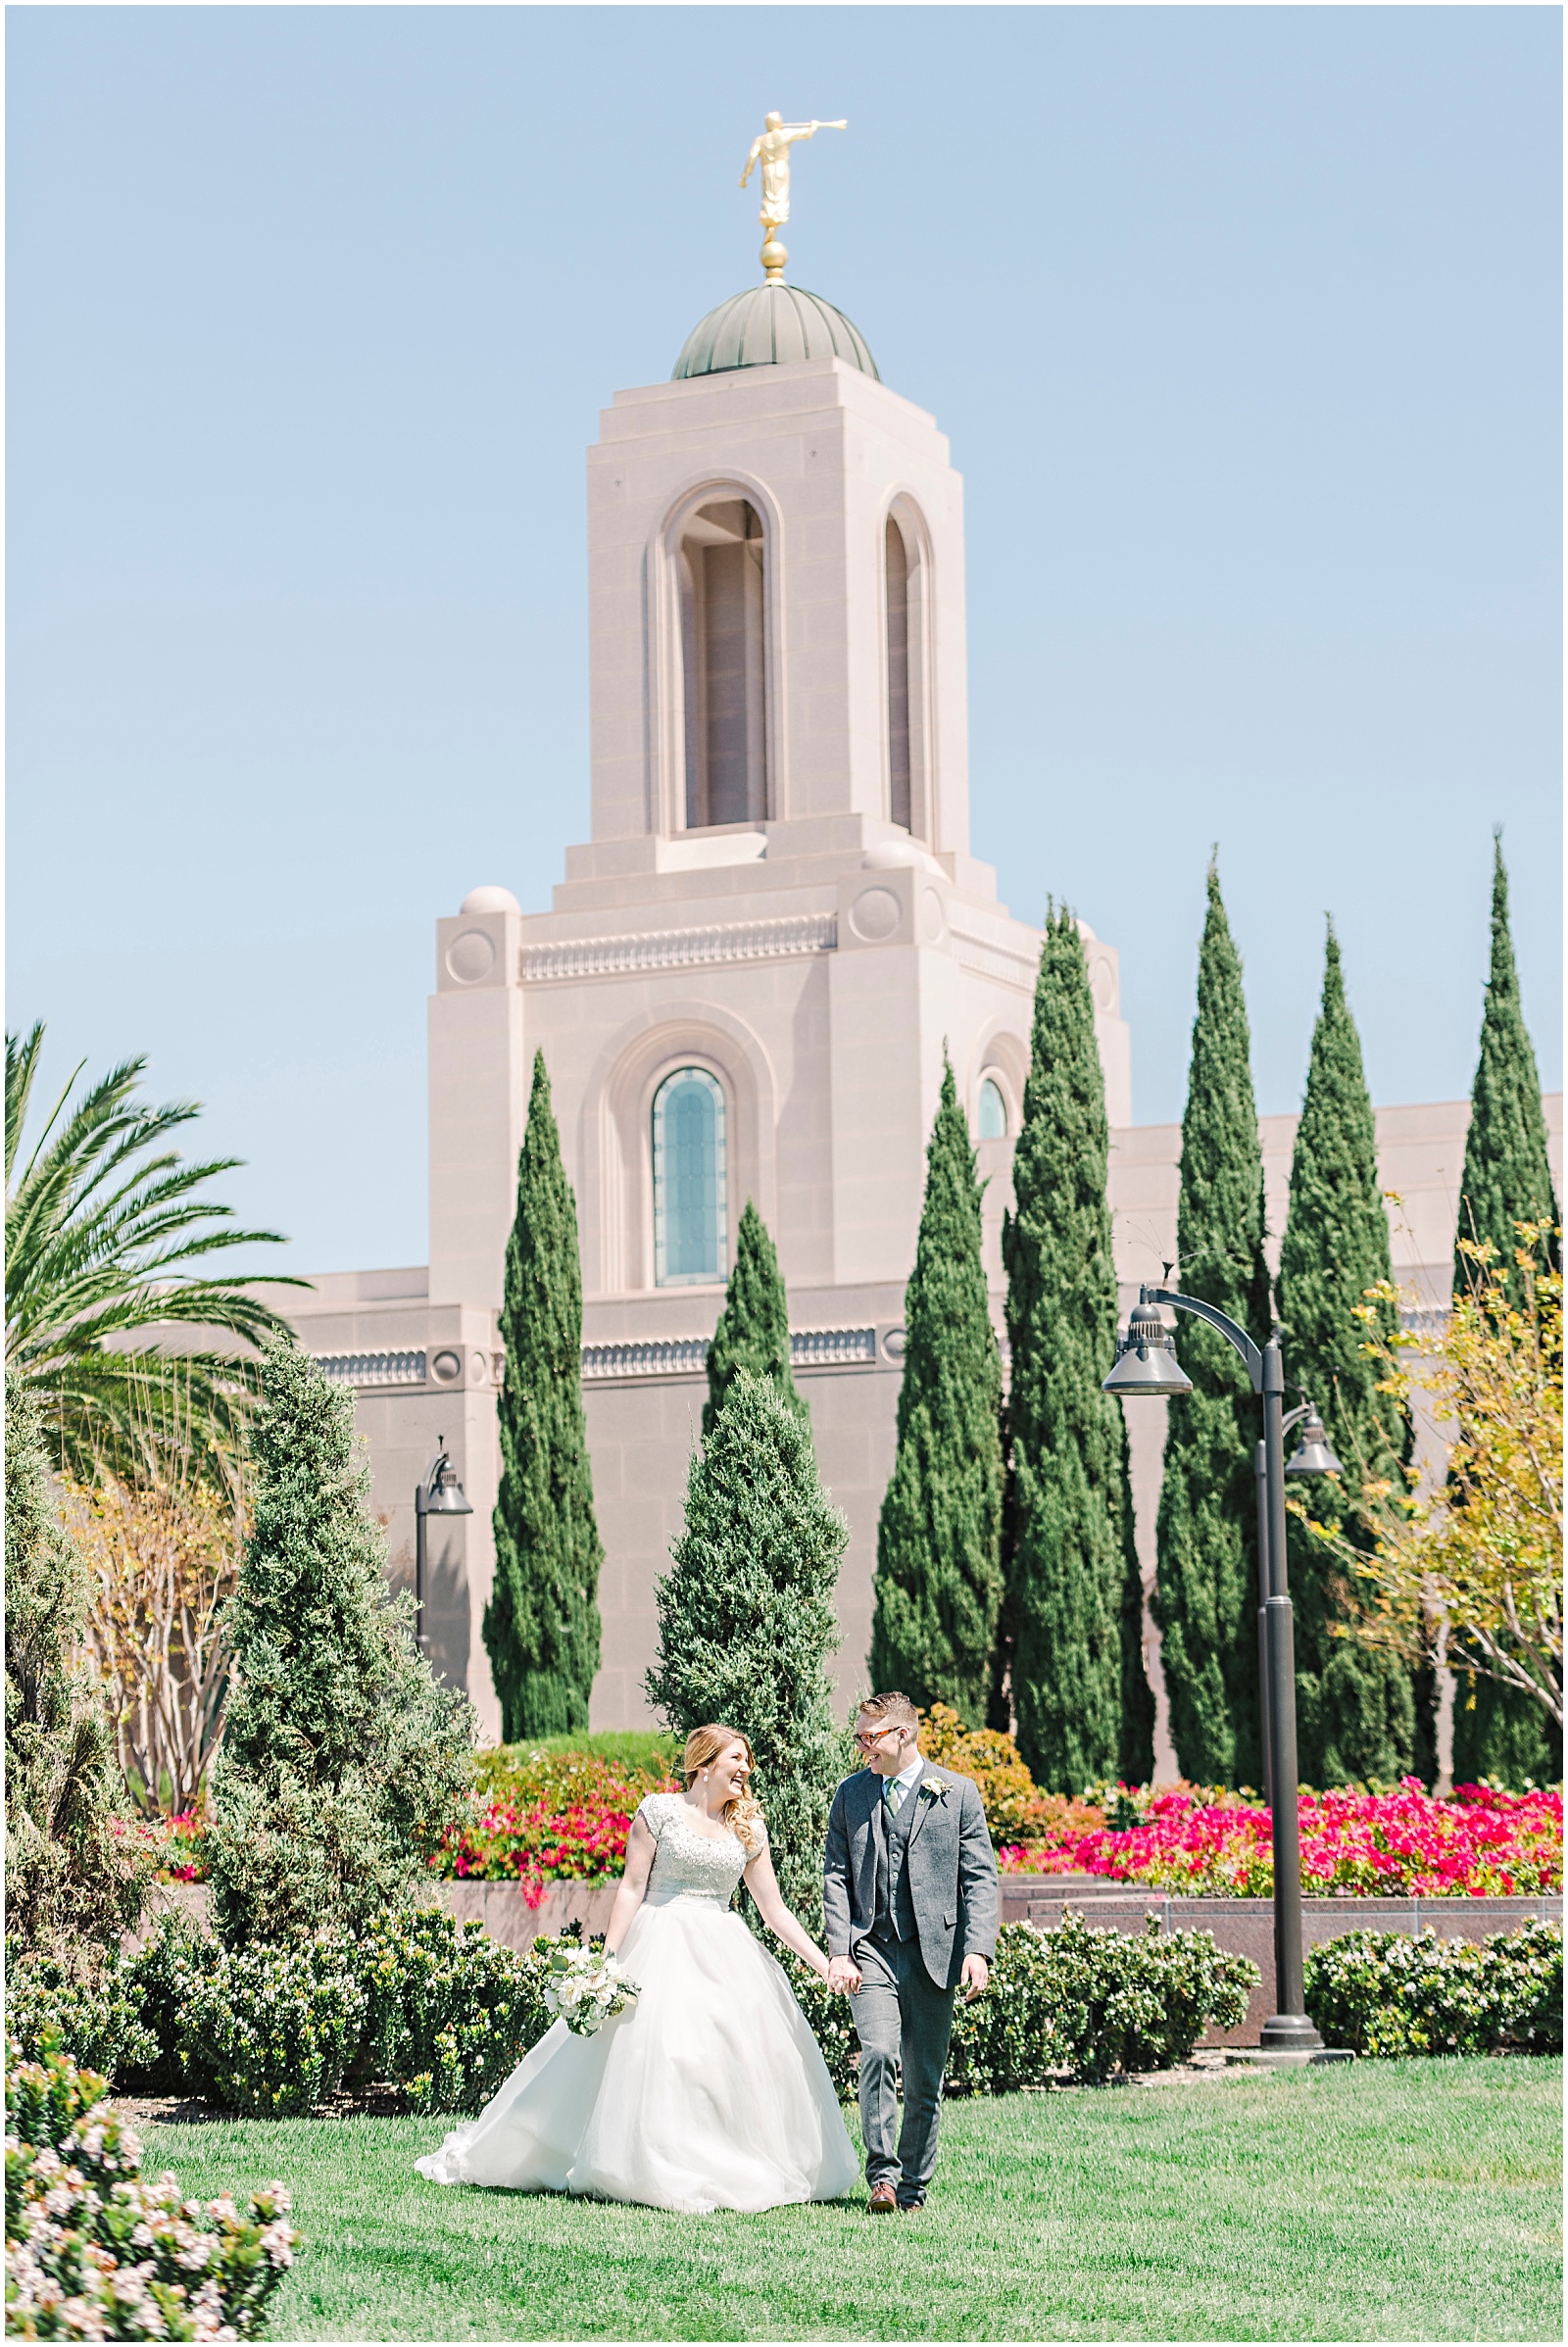 Newport Beach Temple Wedding by Mollie Jane Photography.  To see more go to www.molliejanephotography.com